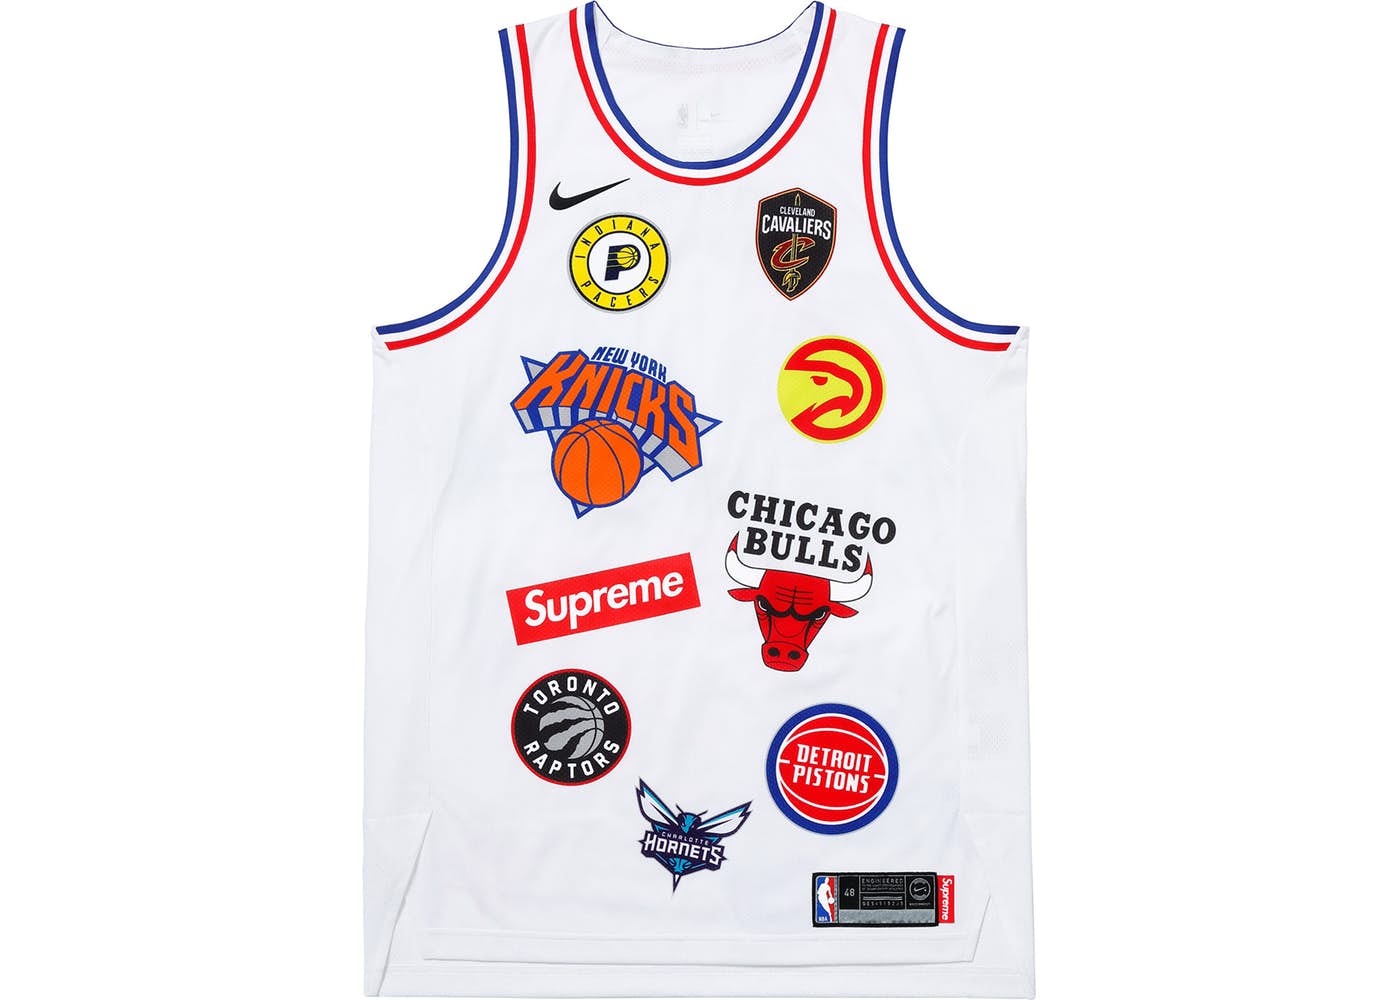 Fake Authentic NBA Jersey?How to Spot a Fake Authentic NBA Jersey